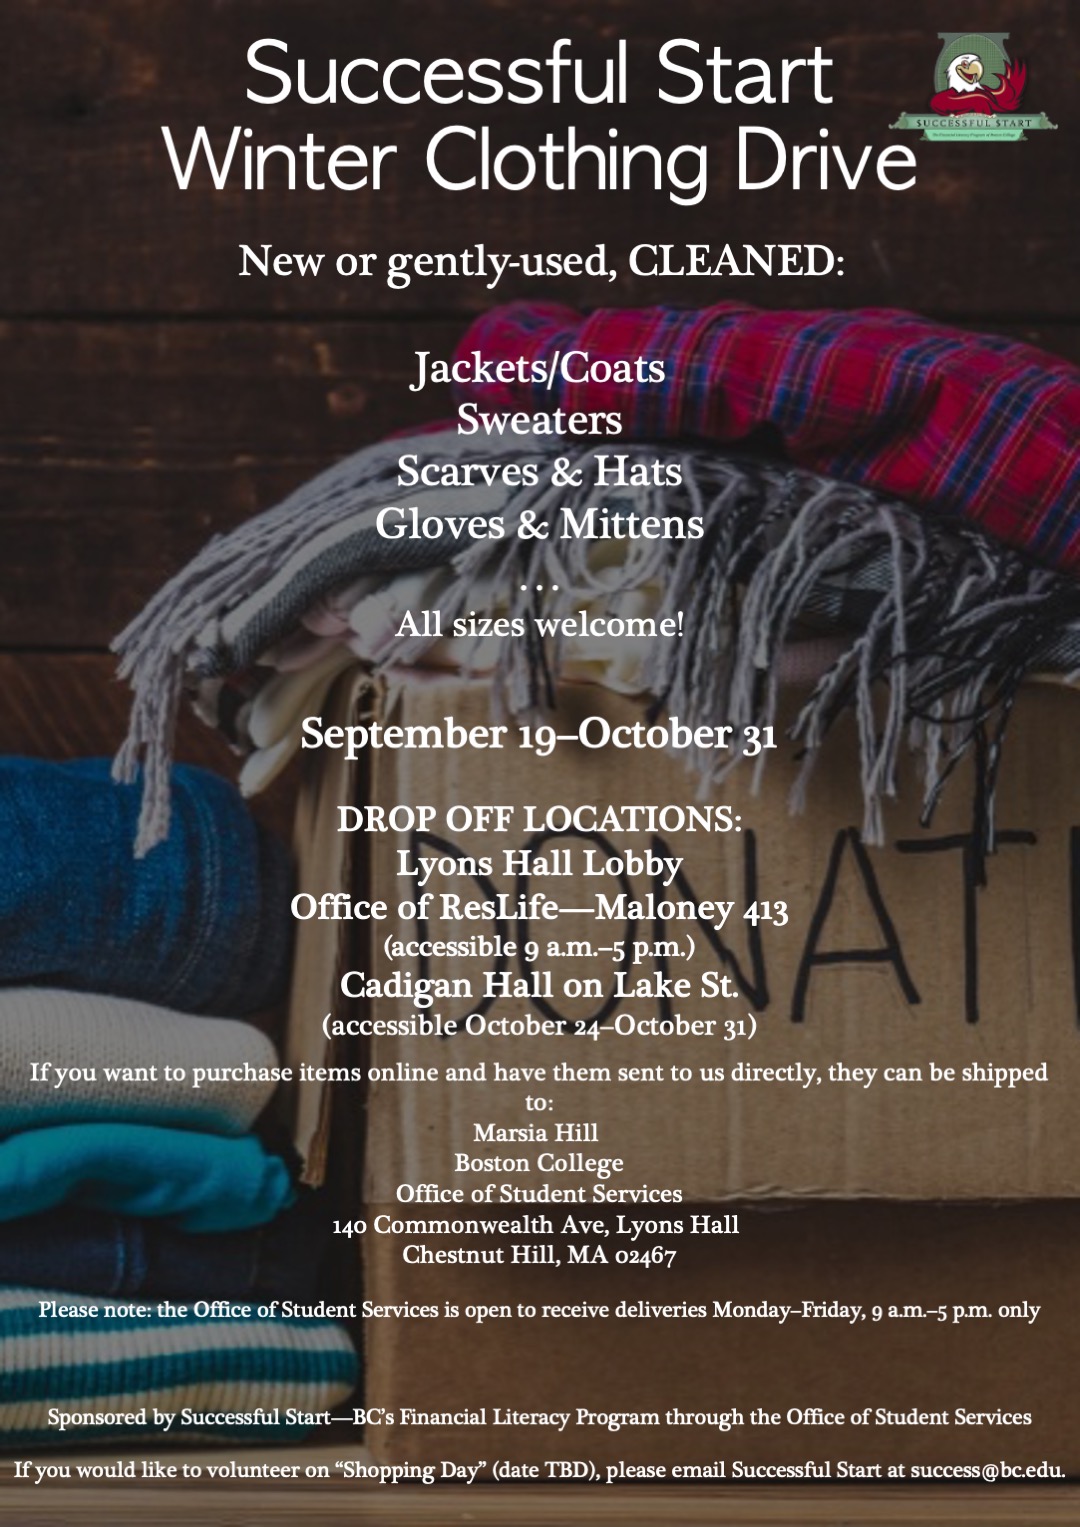 Successful Start, BC's financial wellness program, is hosting its annual winter clothing drive from September 19 to October 31. Requested items include jackets, coats, sweaters, scarves, hats, gloves, and mittens. Clothing can be new or gently used. All items must be cleaned prior to donating. Clothing can be dropped off in the first floor lobby of Lyons Hall, Maloney Hall 413 (accessible 9 a.m.–5 p.m.), and Cadigan Hall on Lake Street (accessible October 24–October 31. If you would like to purchase items online and have them sent to us directly, they can be shipped to: Marsia Hill, Boston College, Office of Student Services, 140 Commonwealth Ave., Lyons Hall, Chestnut Hill, MA 02467. Please note: the Office of Student Services is open to receive deliveries Monday–Friday, 9 a.m.–5 p.m. only. Sponsored by Successful Start—BC's Financial Literacy Program through the Office of Student Services.